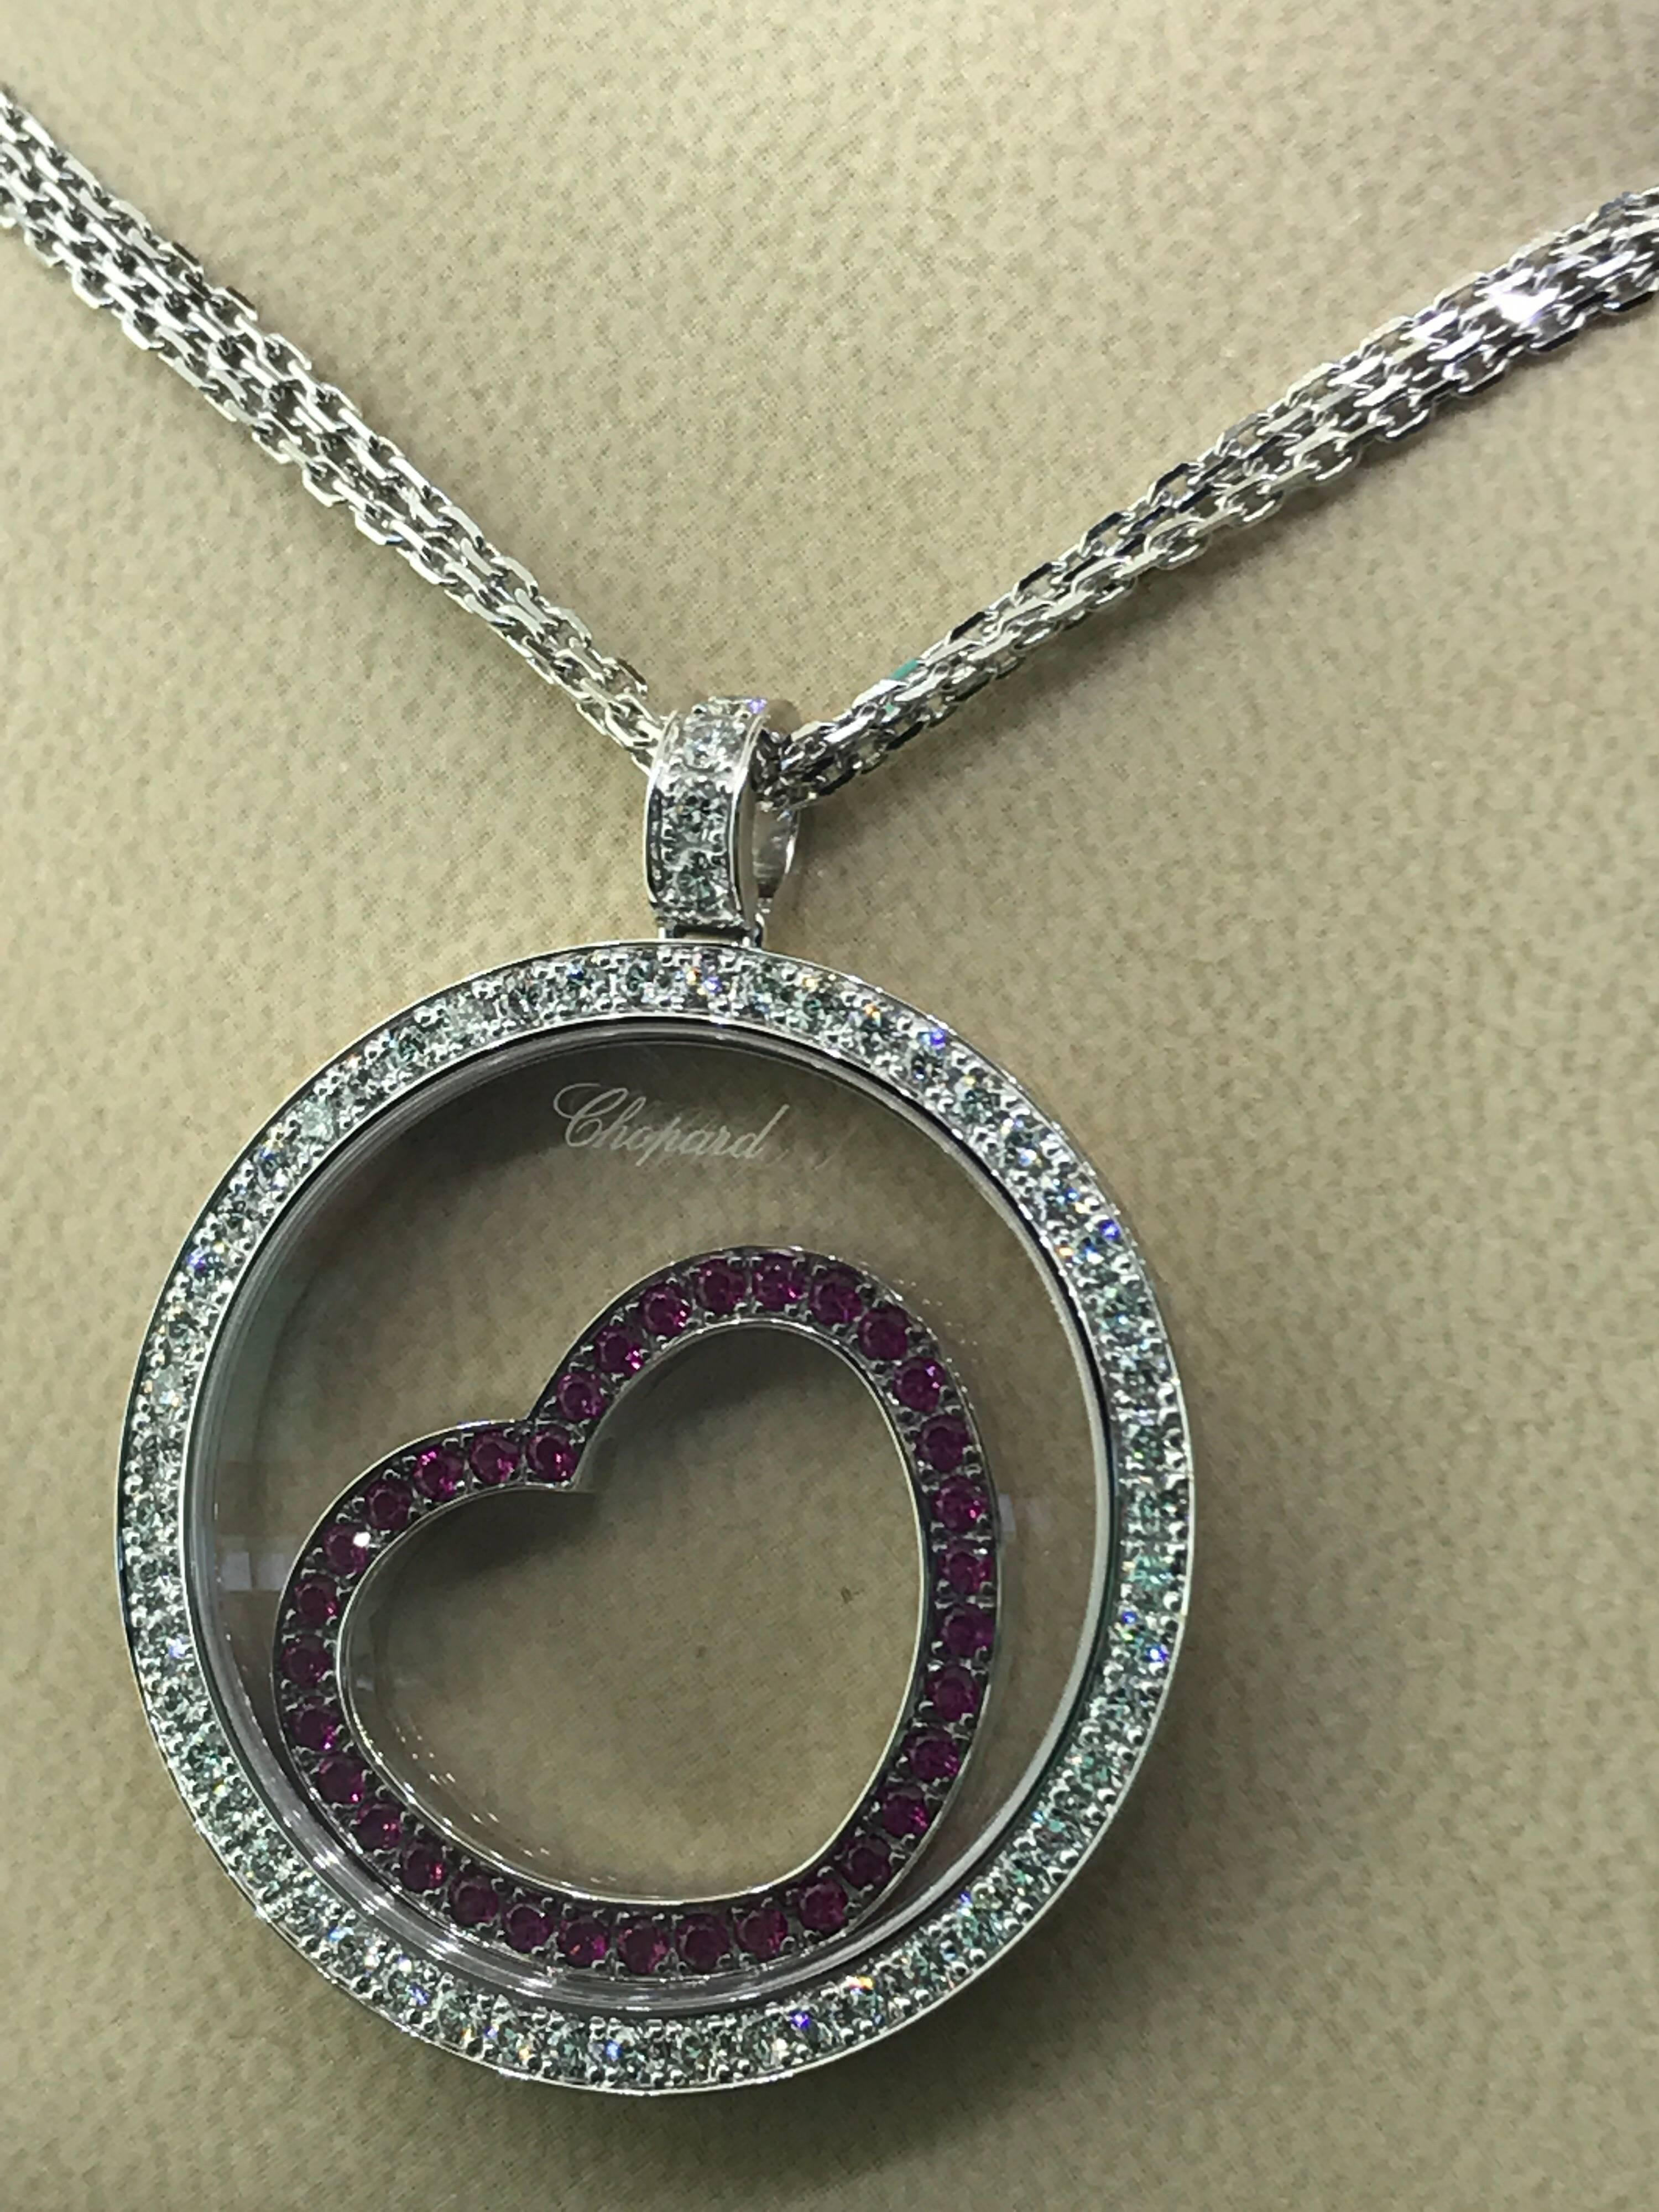 Chopard Happy Diamonds White Gold Diamond and Rubies Heart Pendant Necklace New 5